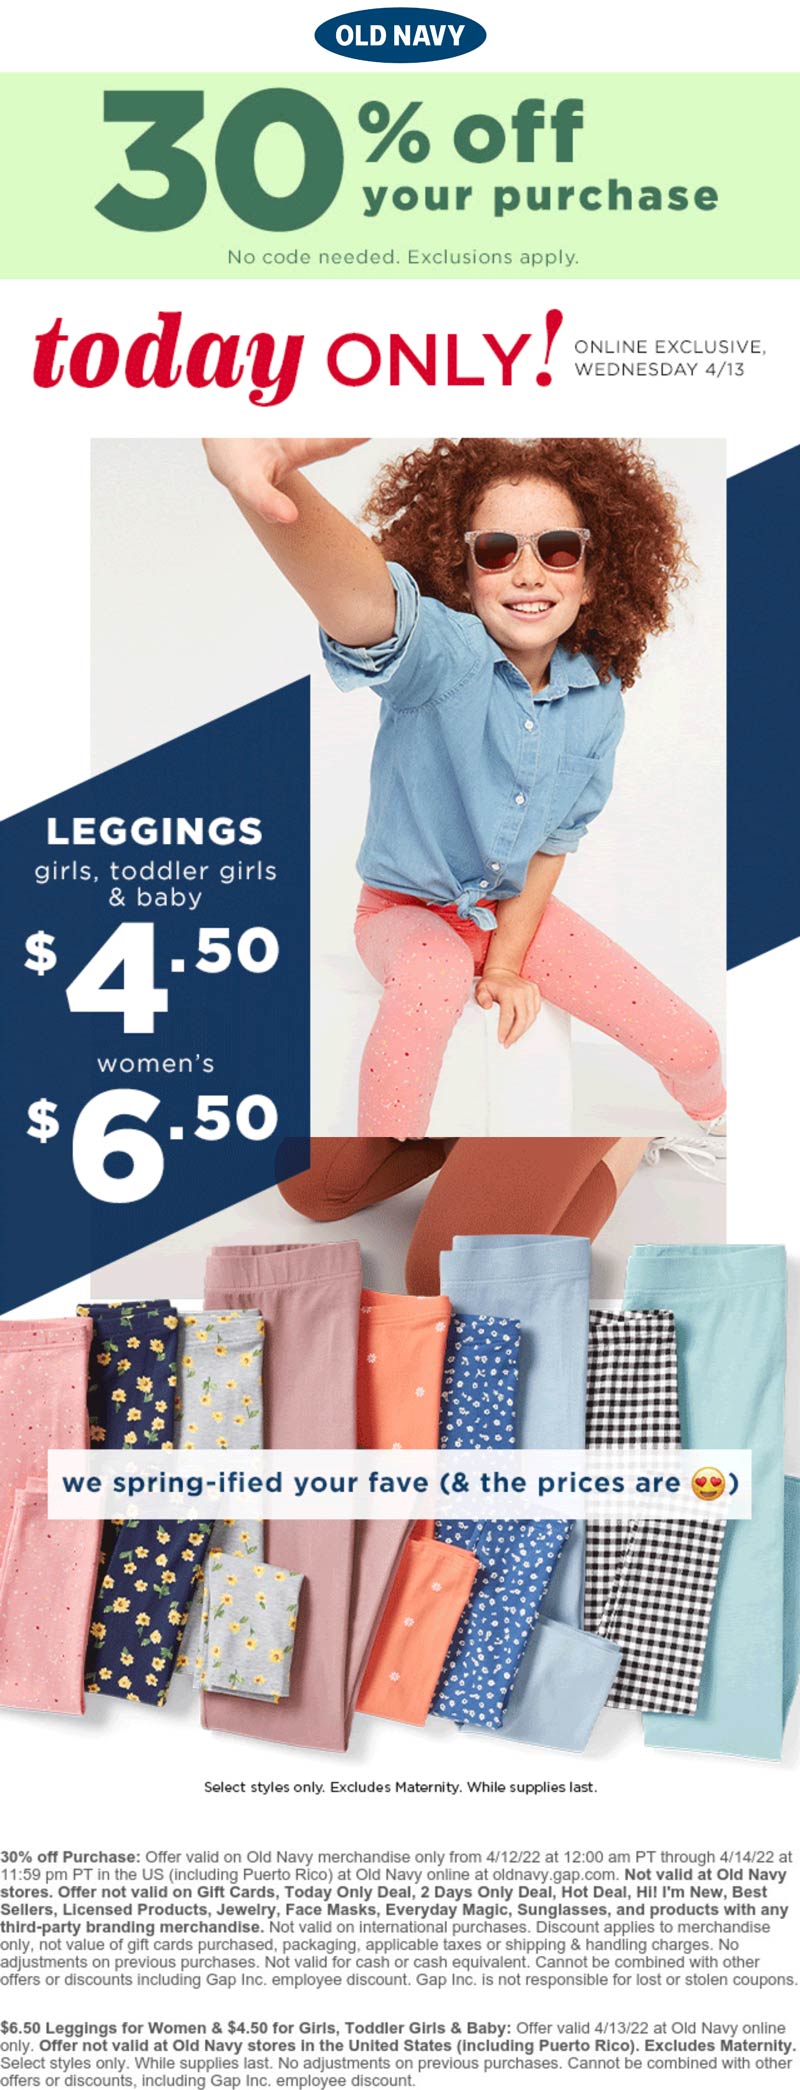 Old Navy stores Coupon  30% off online at Old Navy #oldnavy 